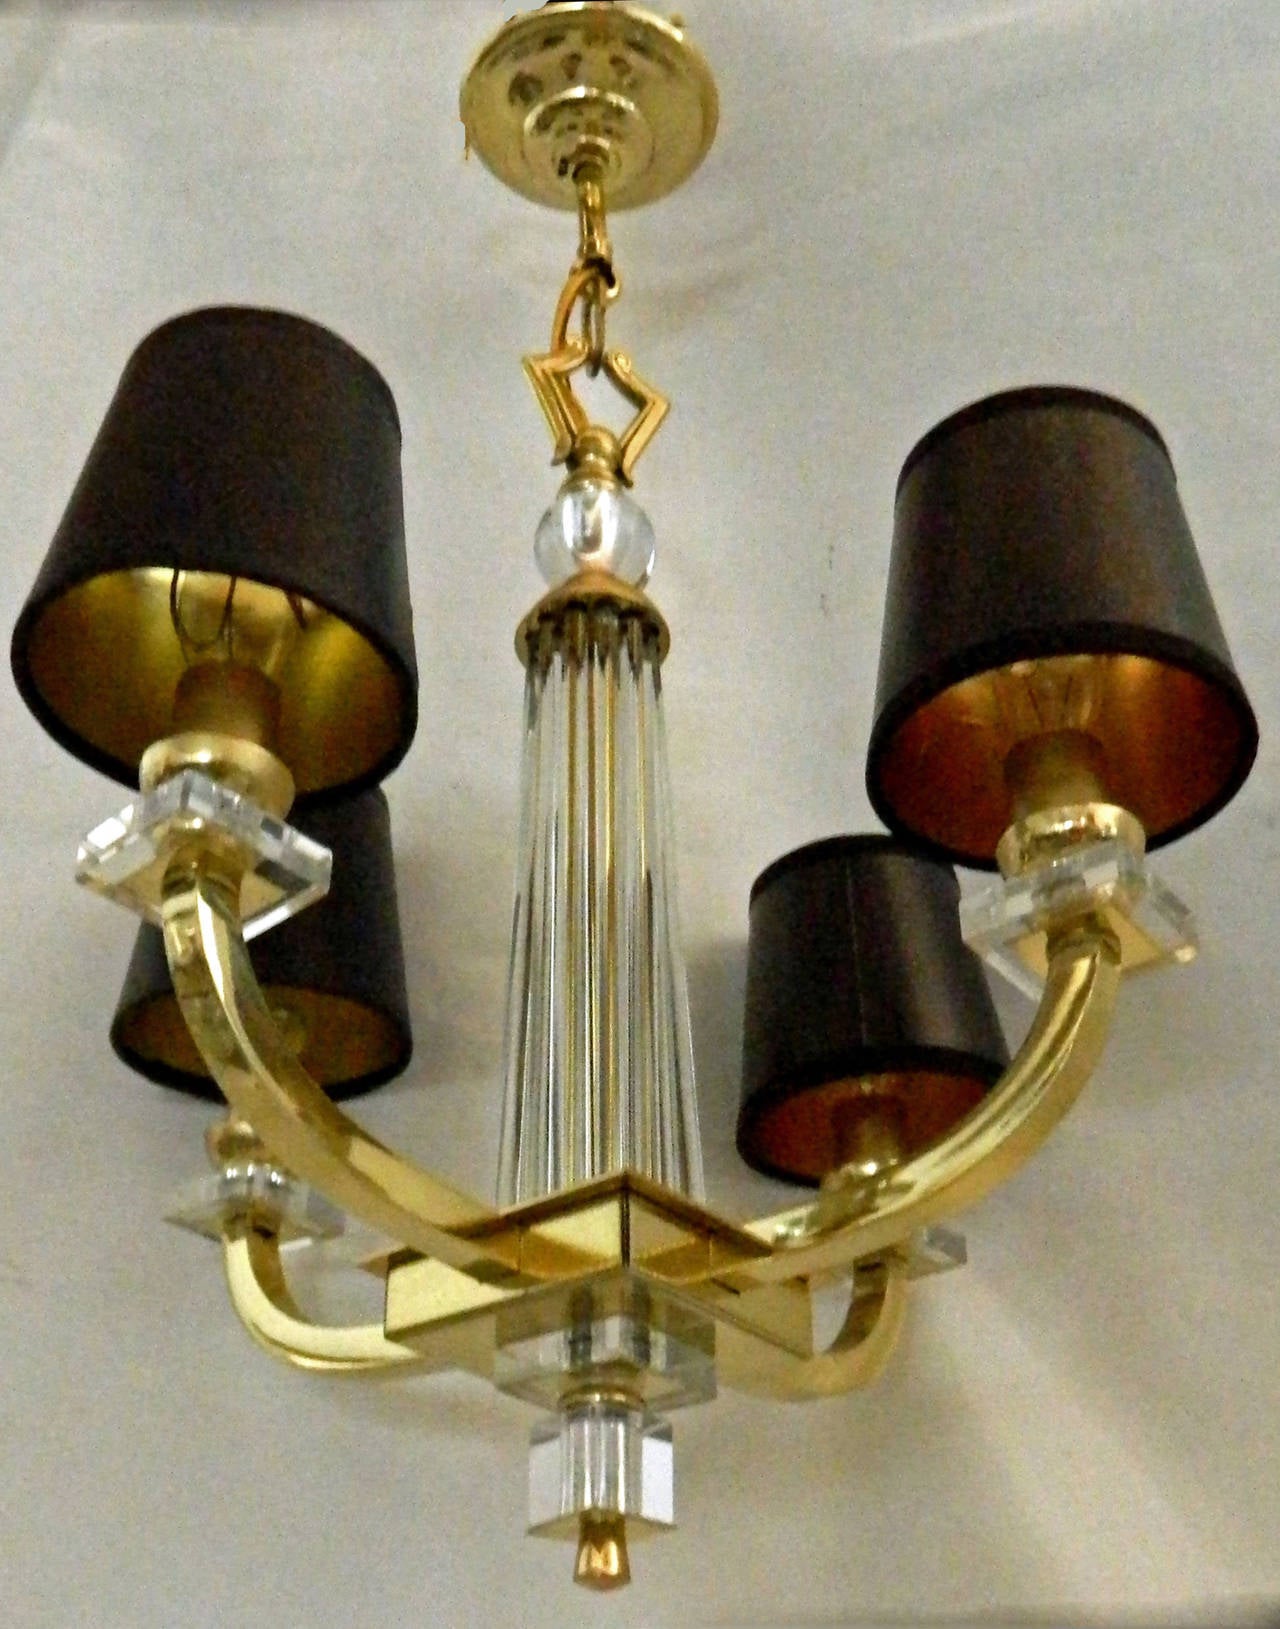 Rare pair of Jacques Adnet chandeliers, glass rods central part and square cabochon in a brass frame.
Exceptional set of six chandeliers available.
Provenance: Parisian Hotel.
$ 3450 for one chandelier.
Four lights, 60 watts bulb max each.
Four